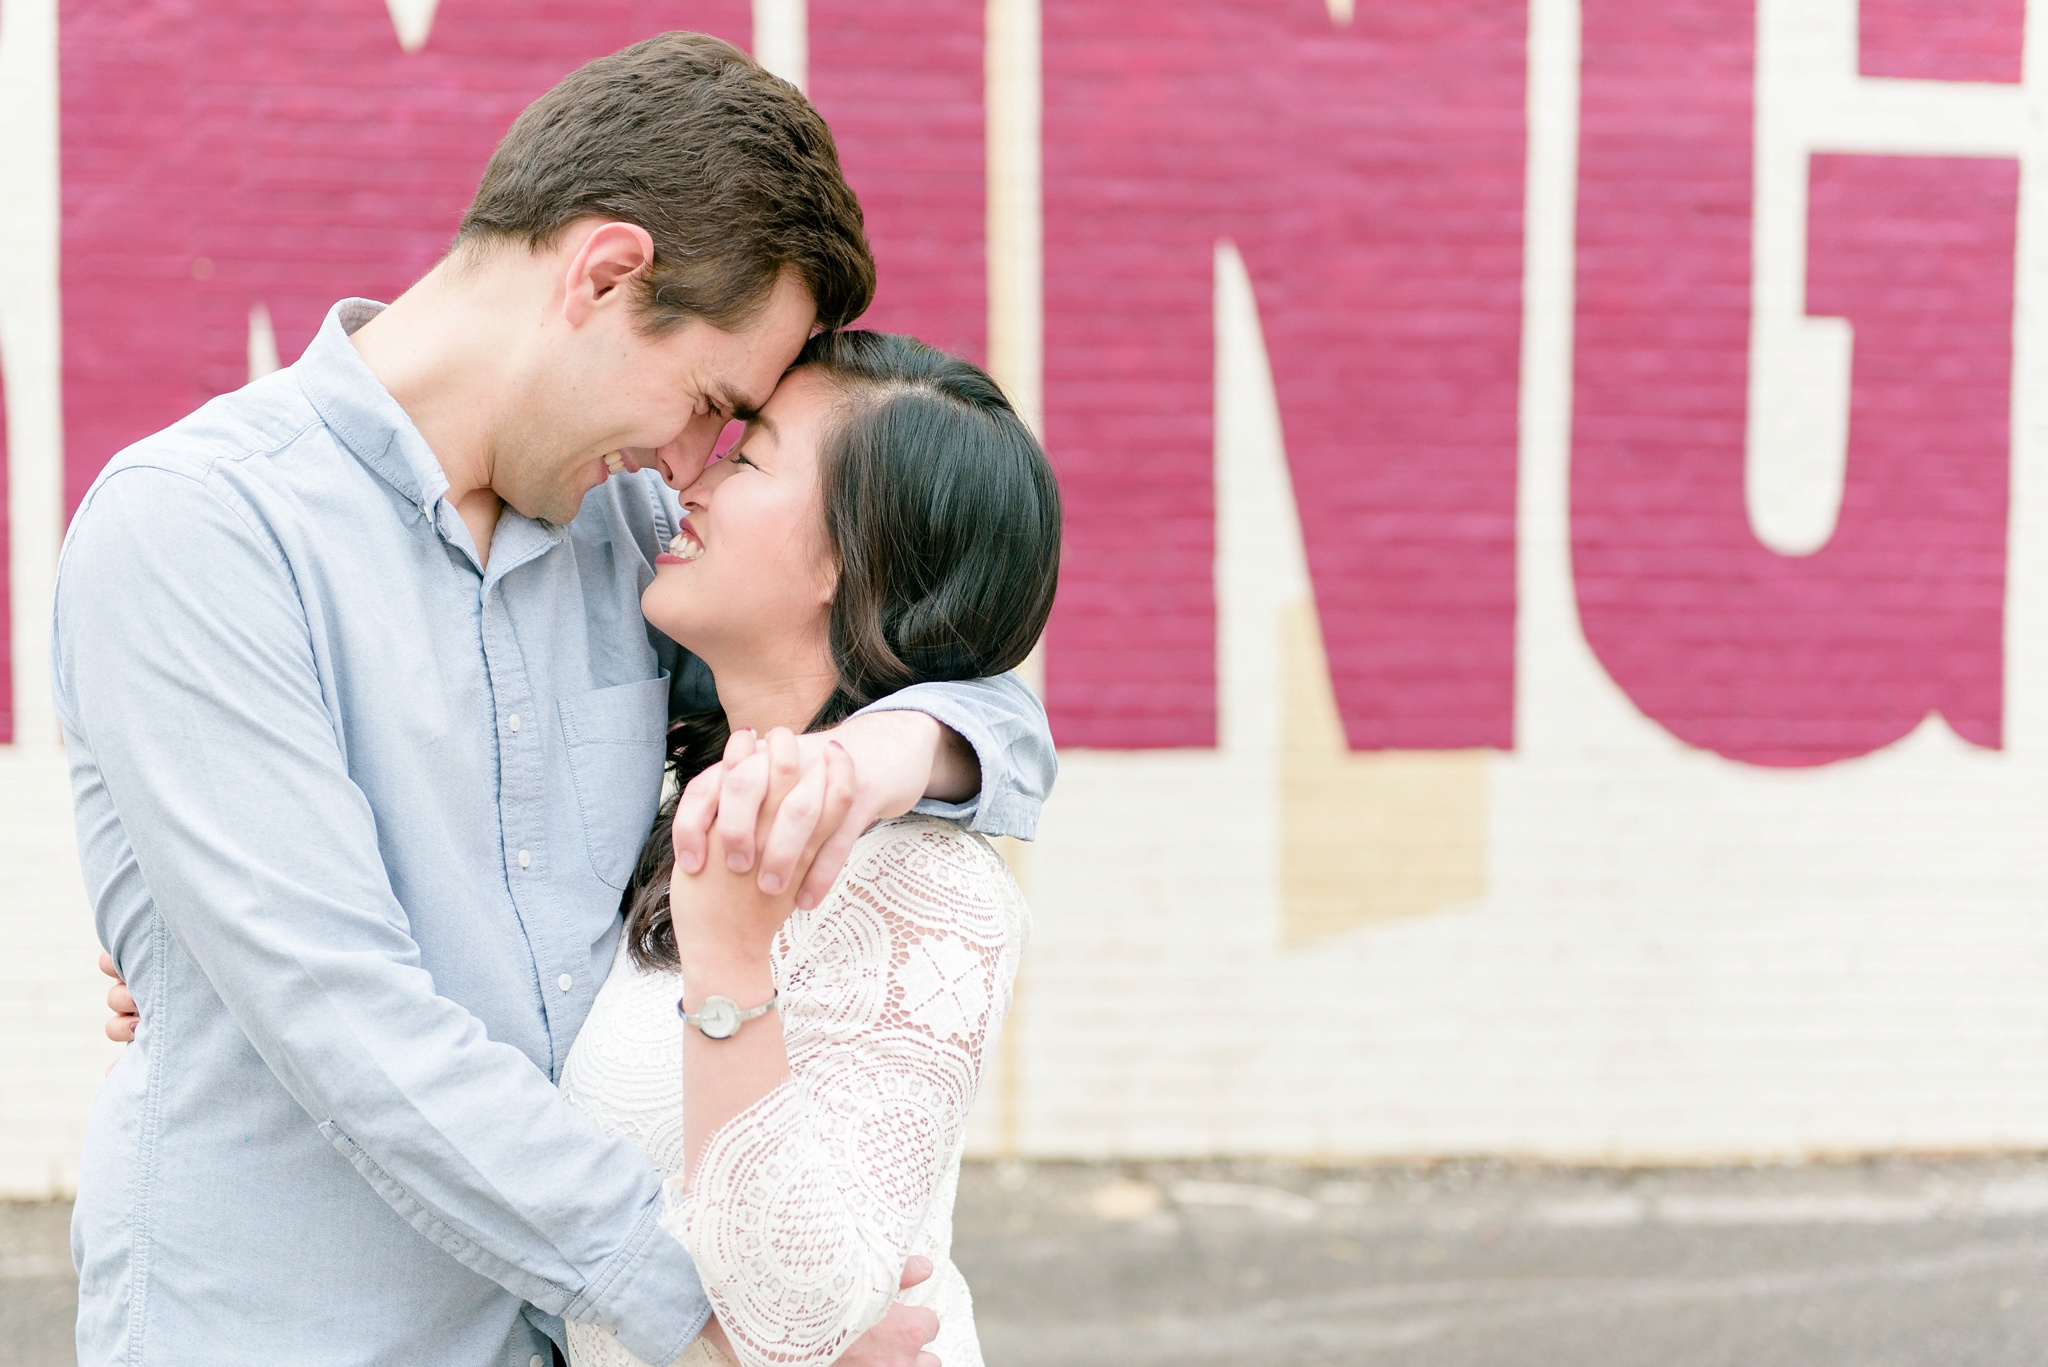 Downtown Nice to Have You in Birmingham Engagement Session| Birmingham Alabama Wedding Photographers_0001.jpg